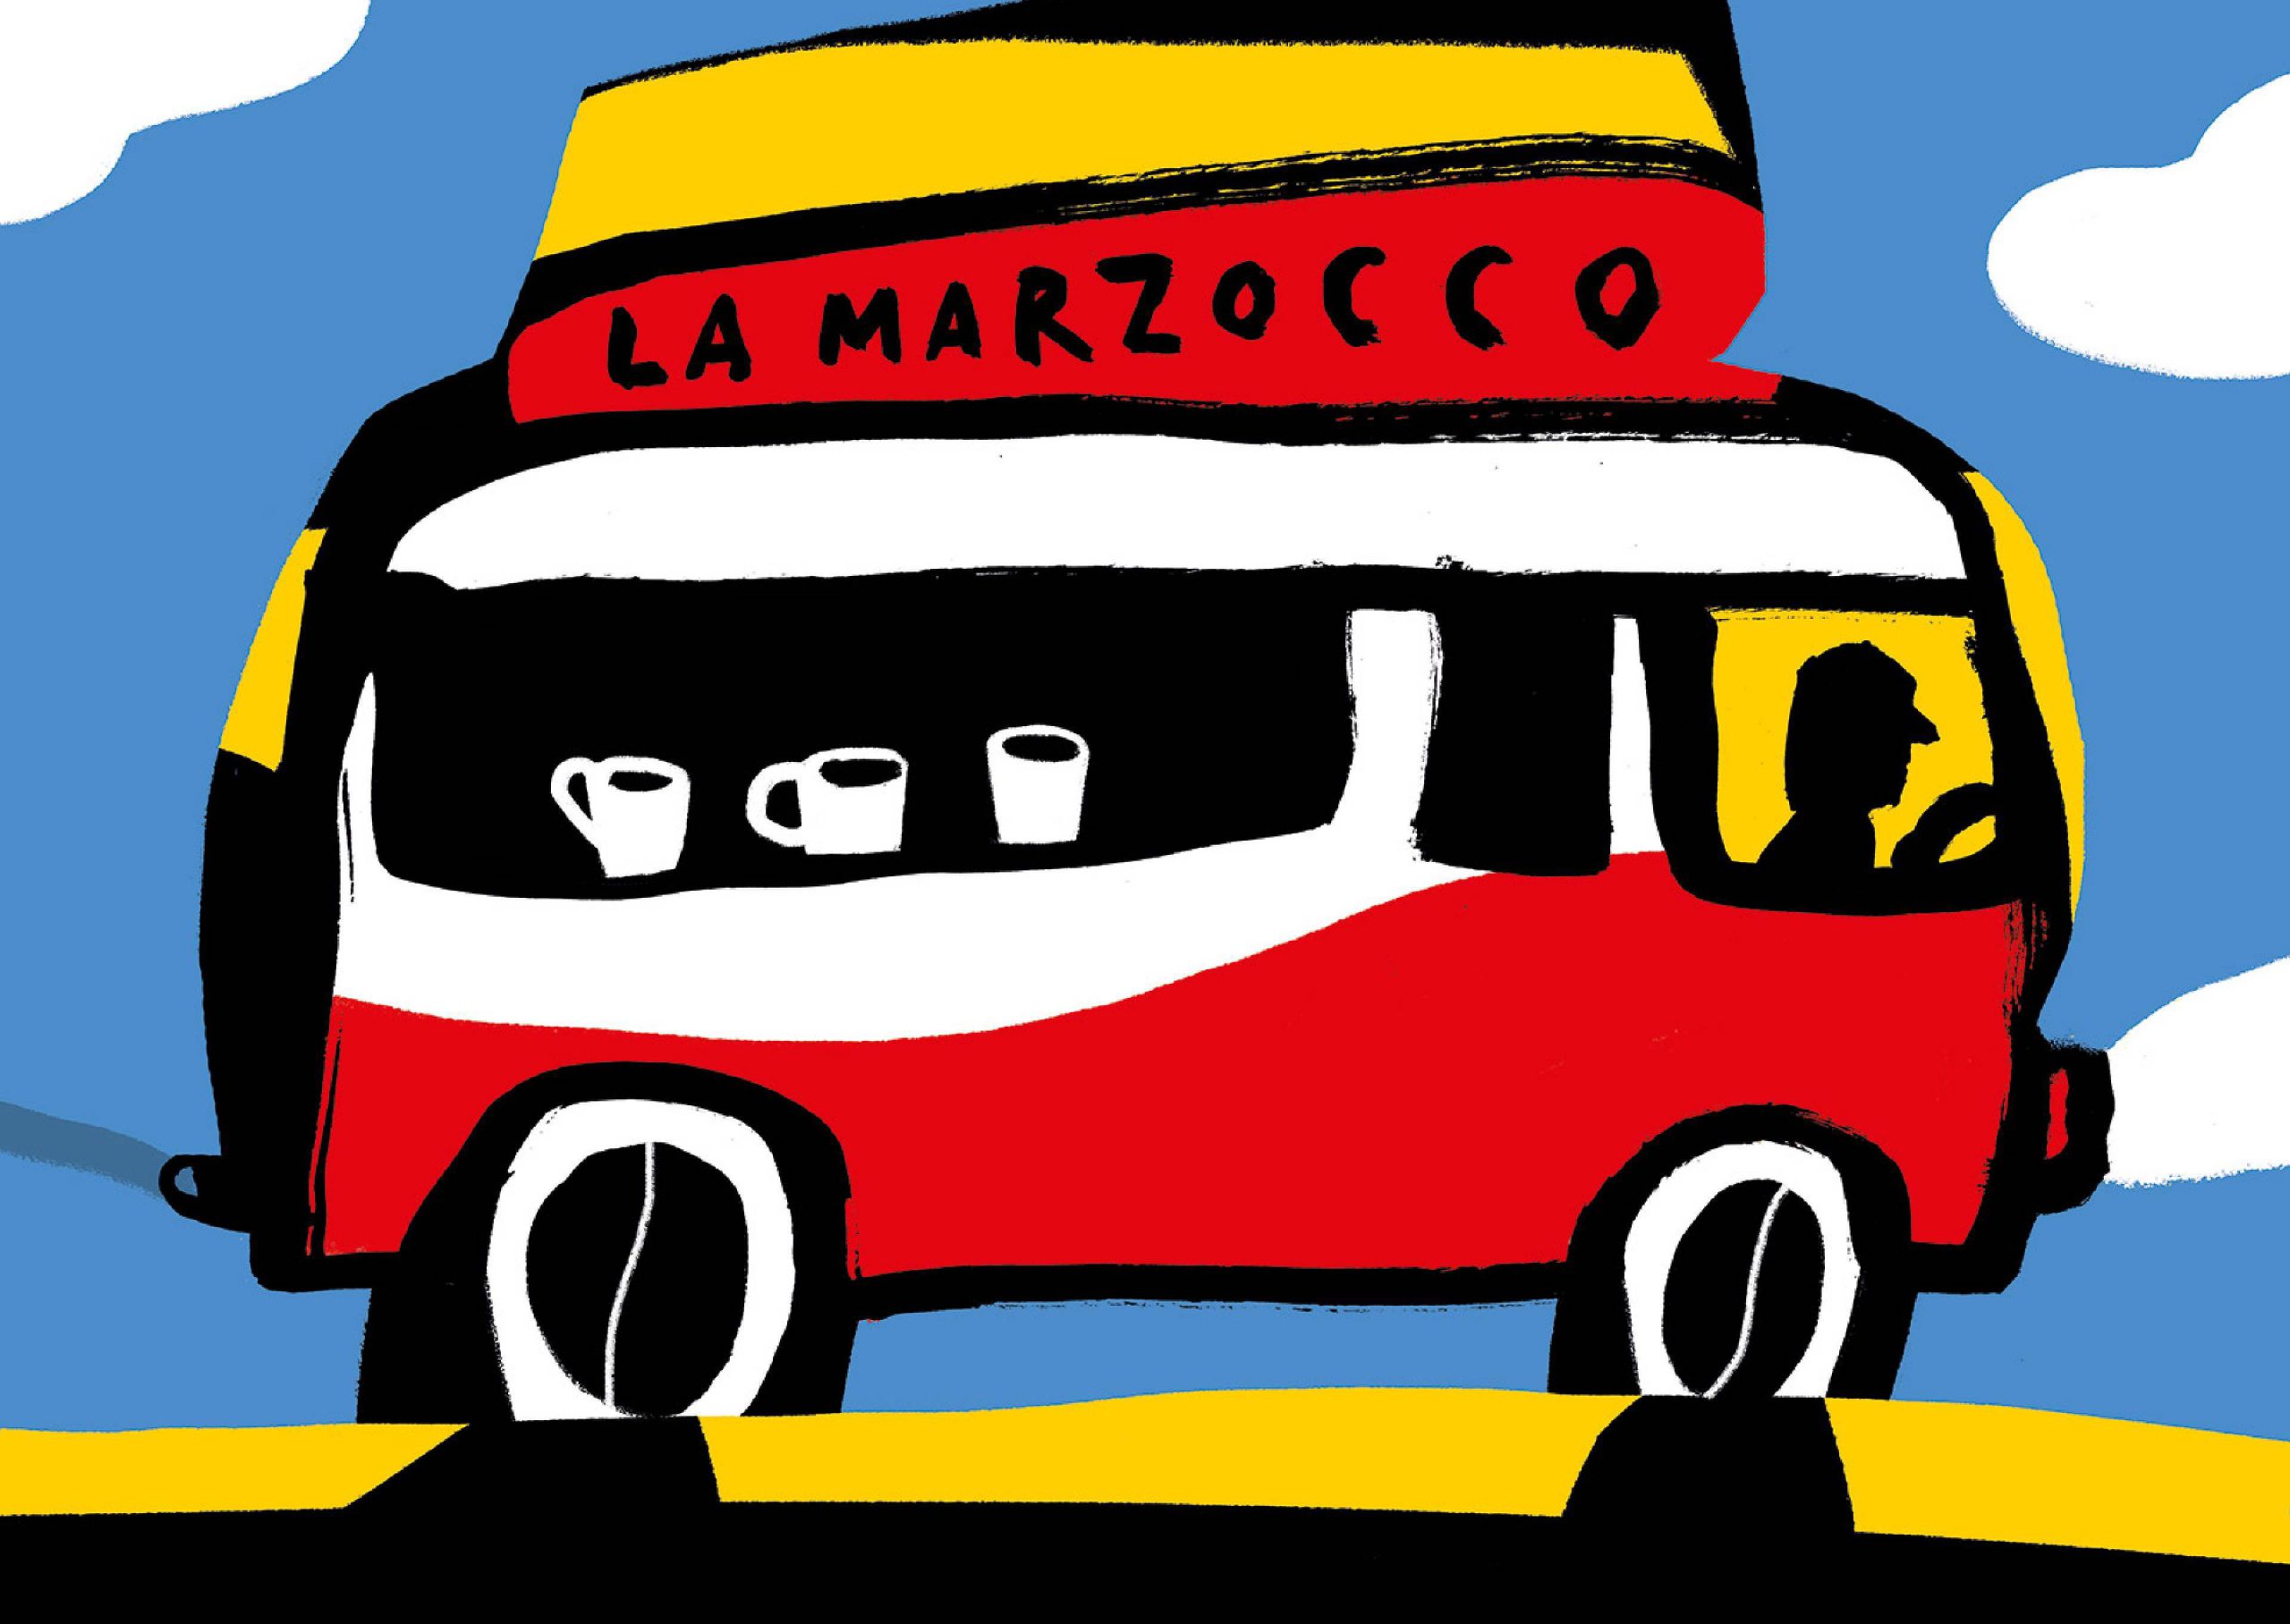 Impressionist painting of the red and white la marzocco coffee van